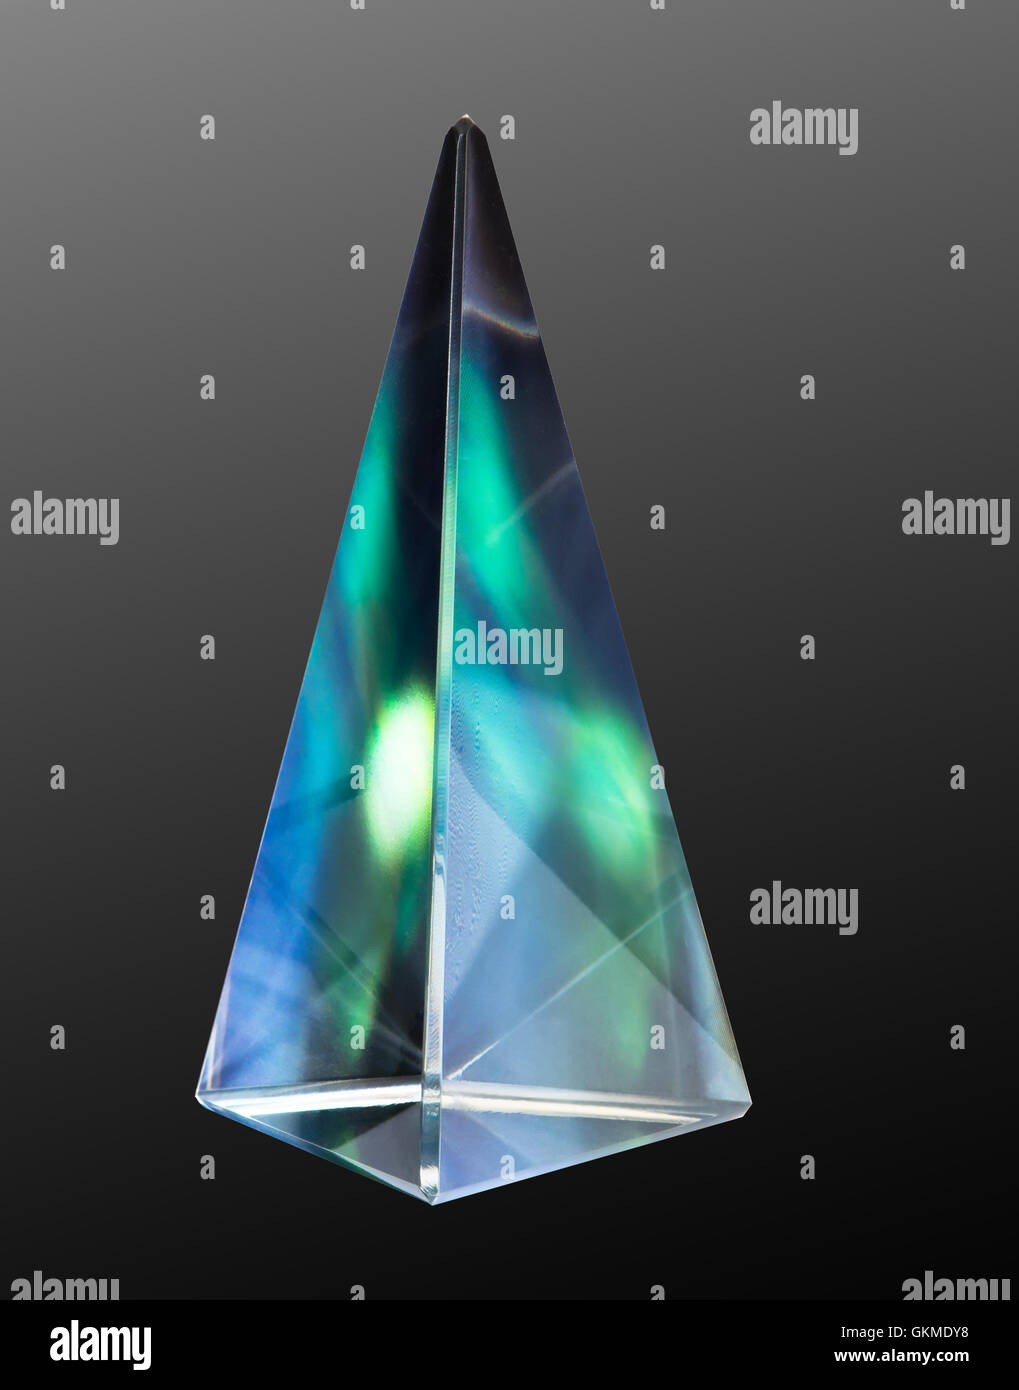 northern light in a glass prism Stock Photo